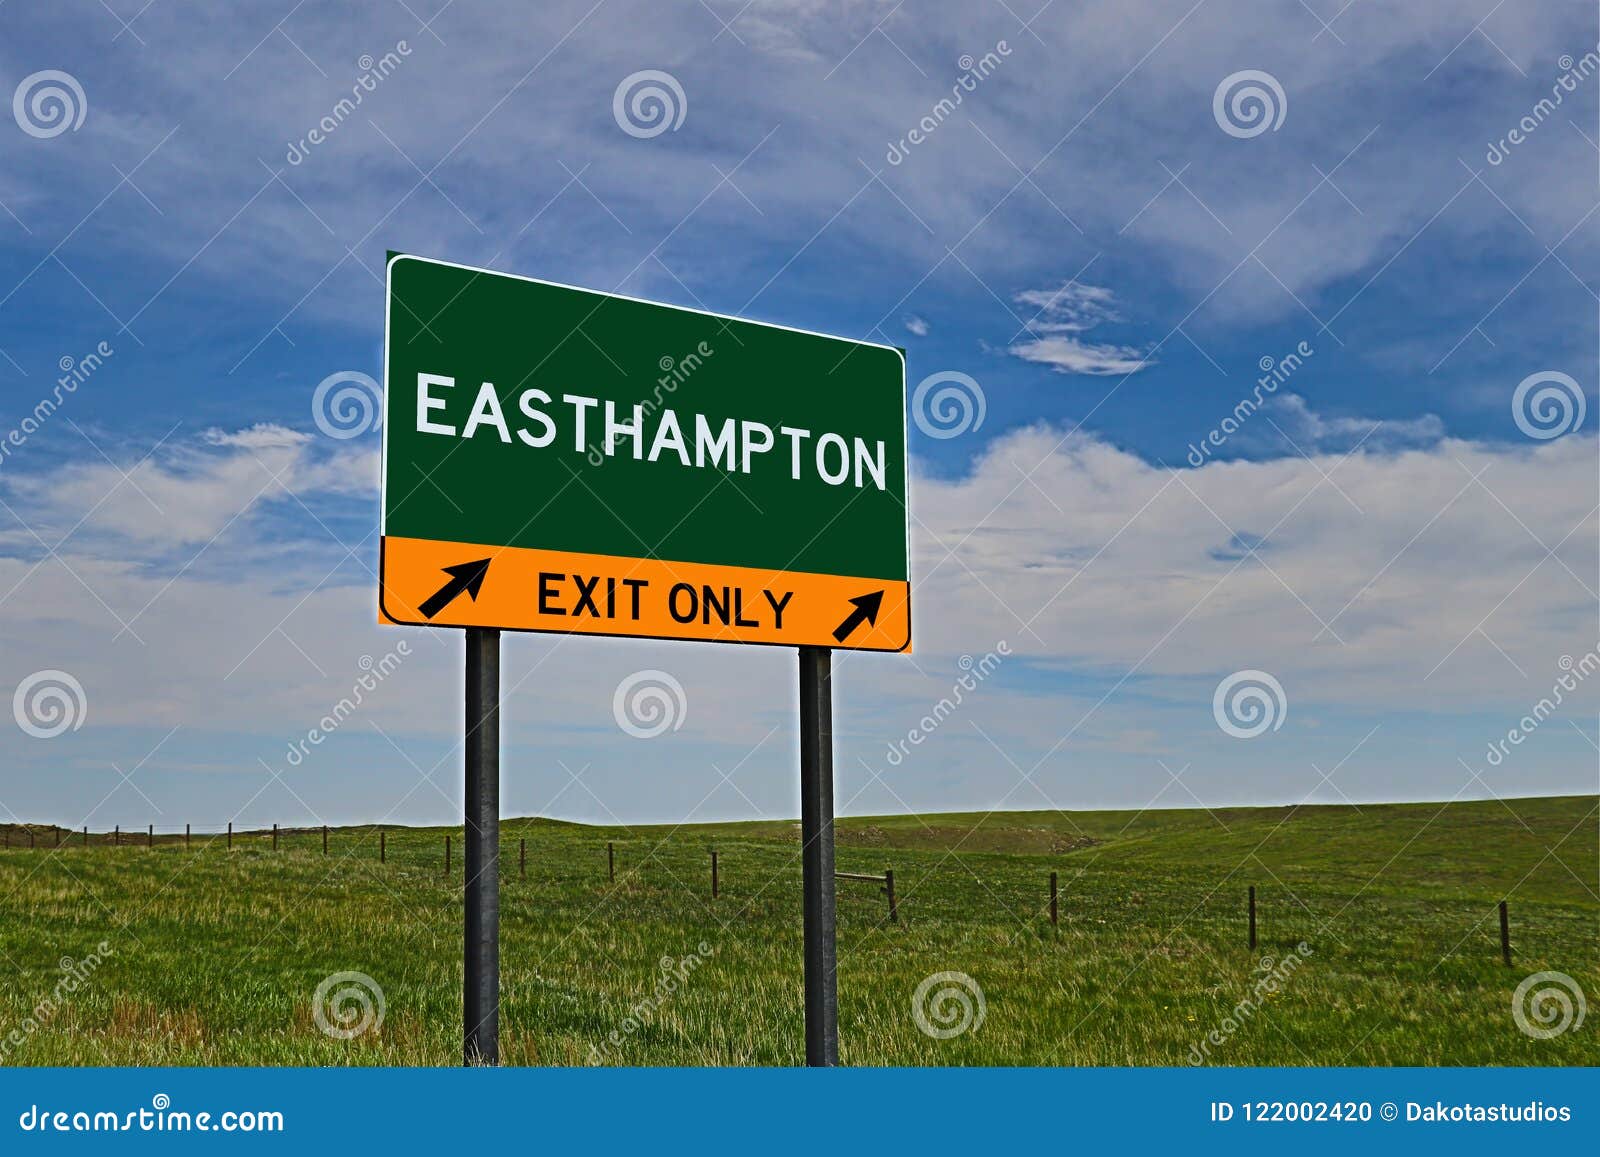 us highway exit sign for easthampton